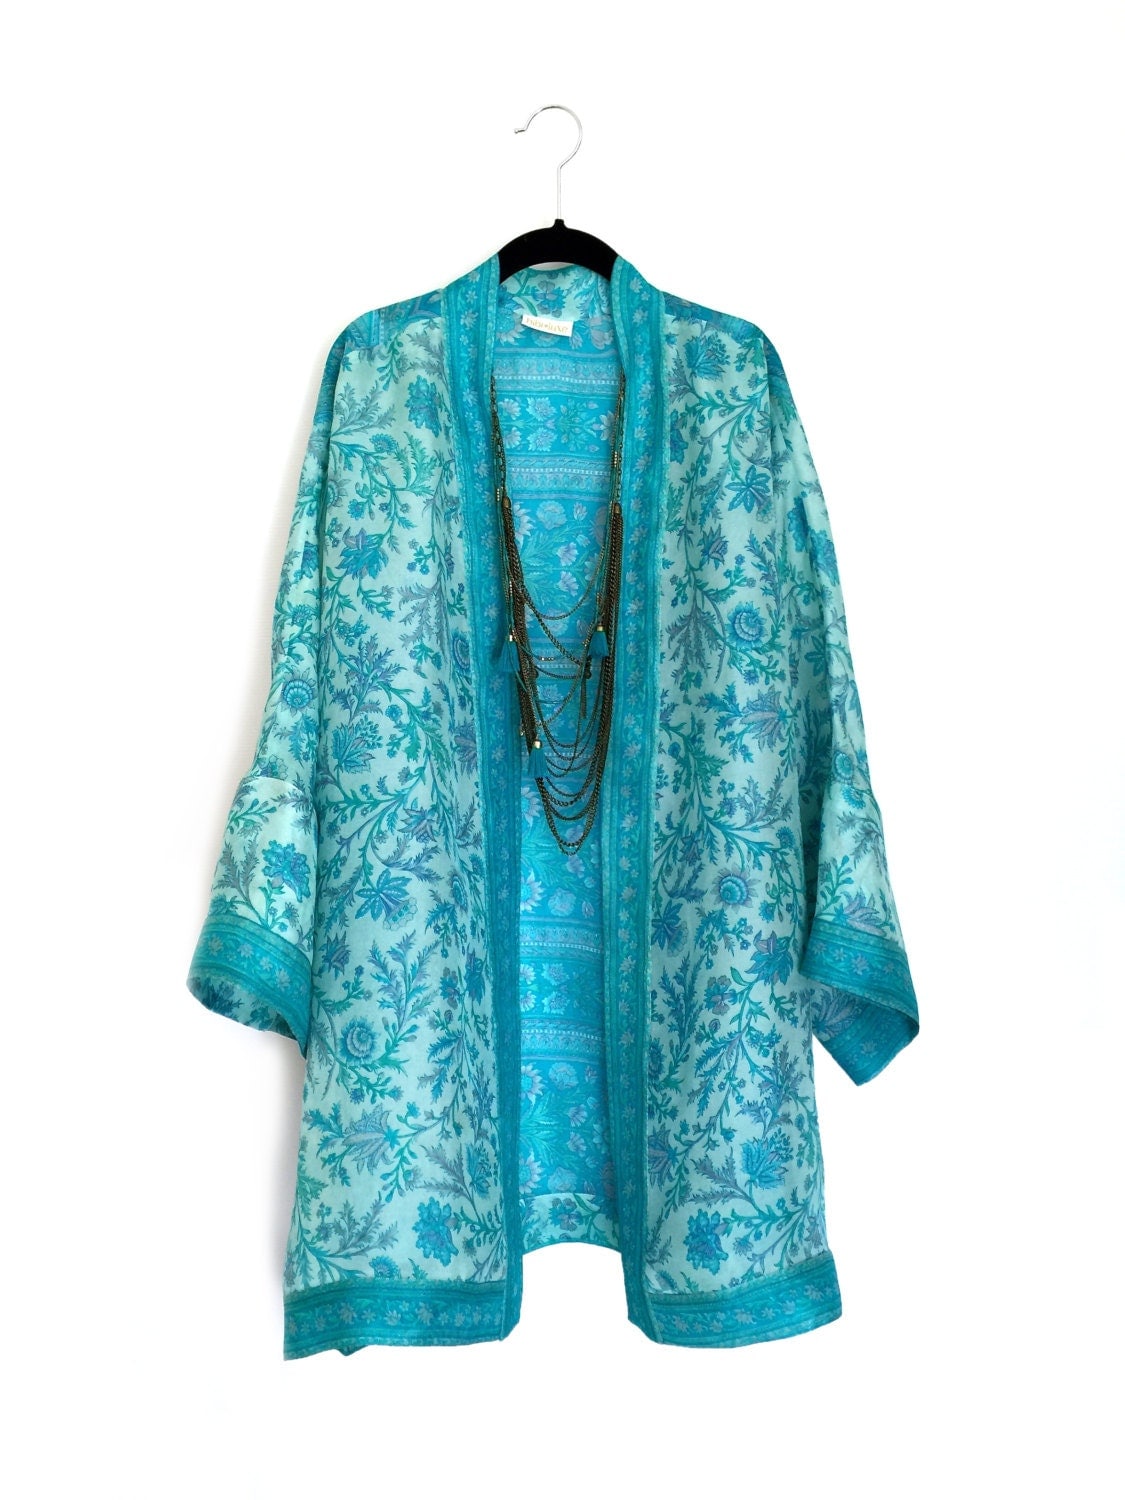 Silk Kimono jacket oversized cover up in turquoise with an